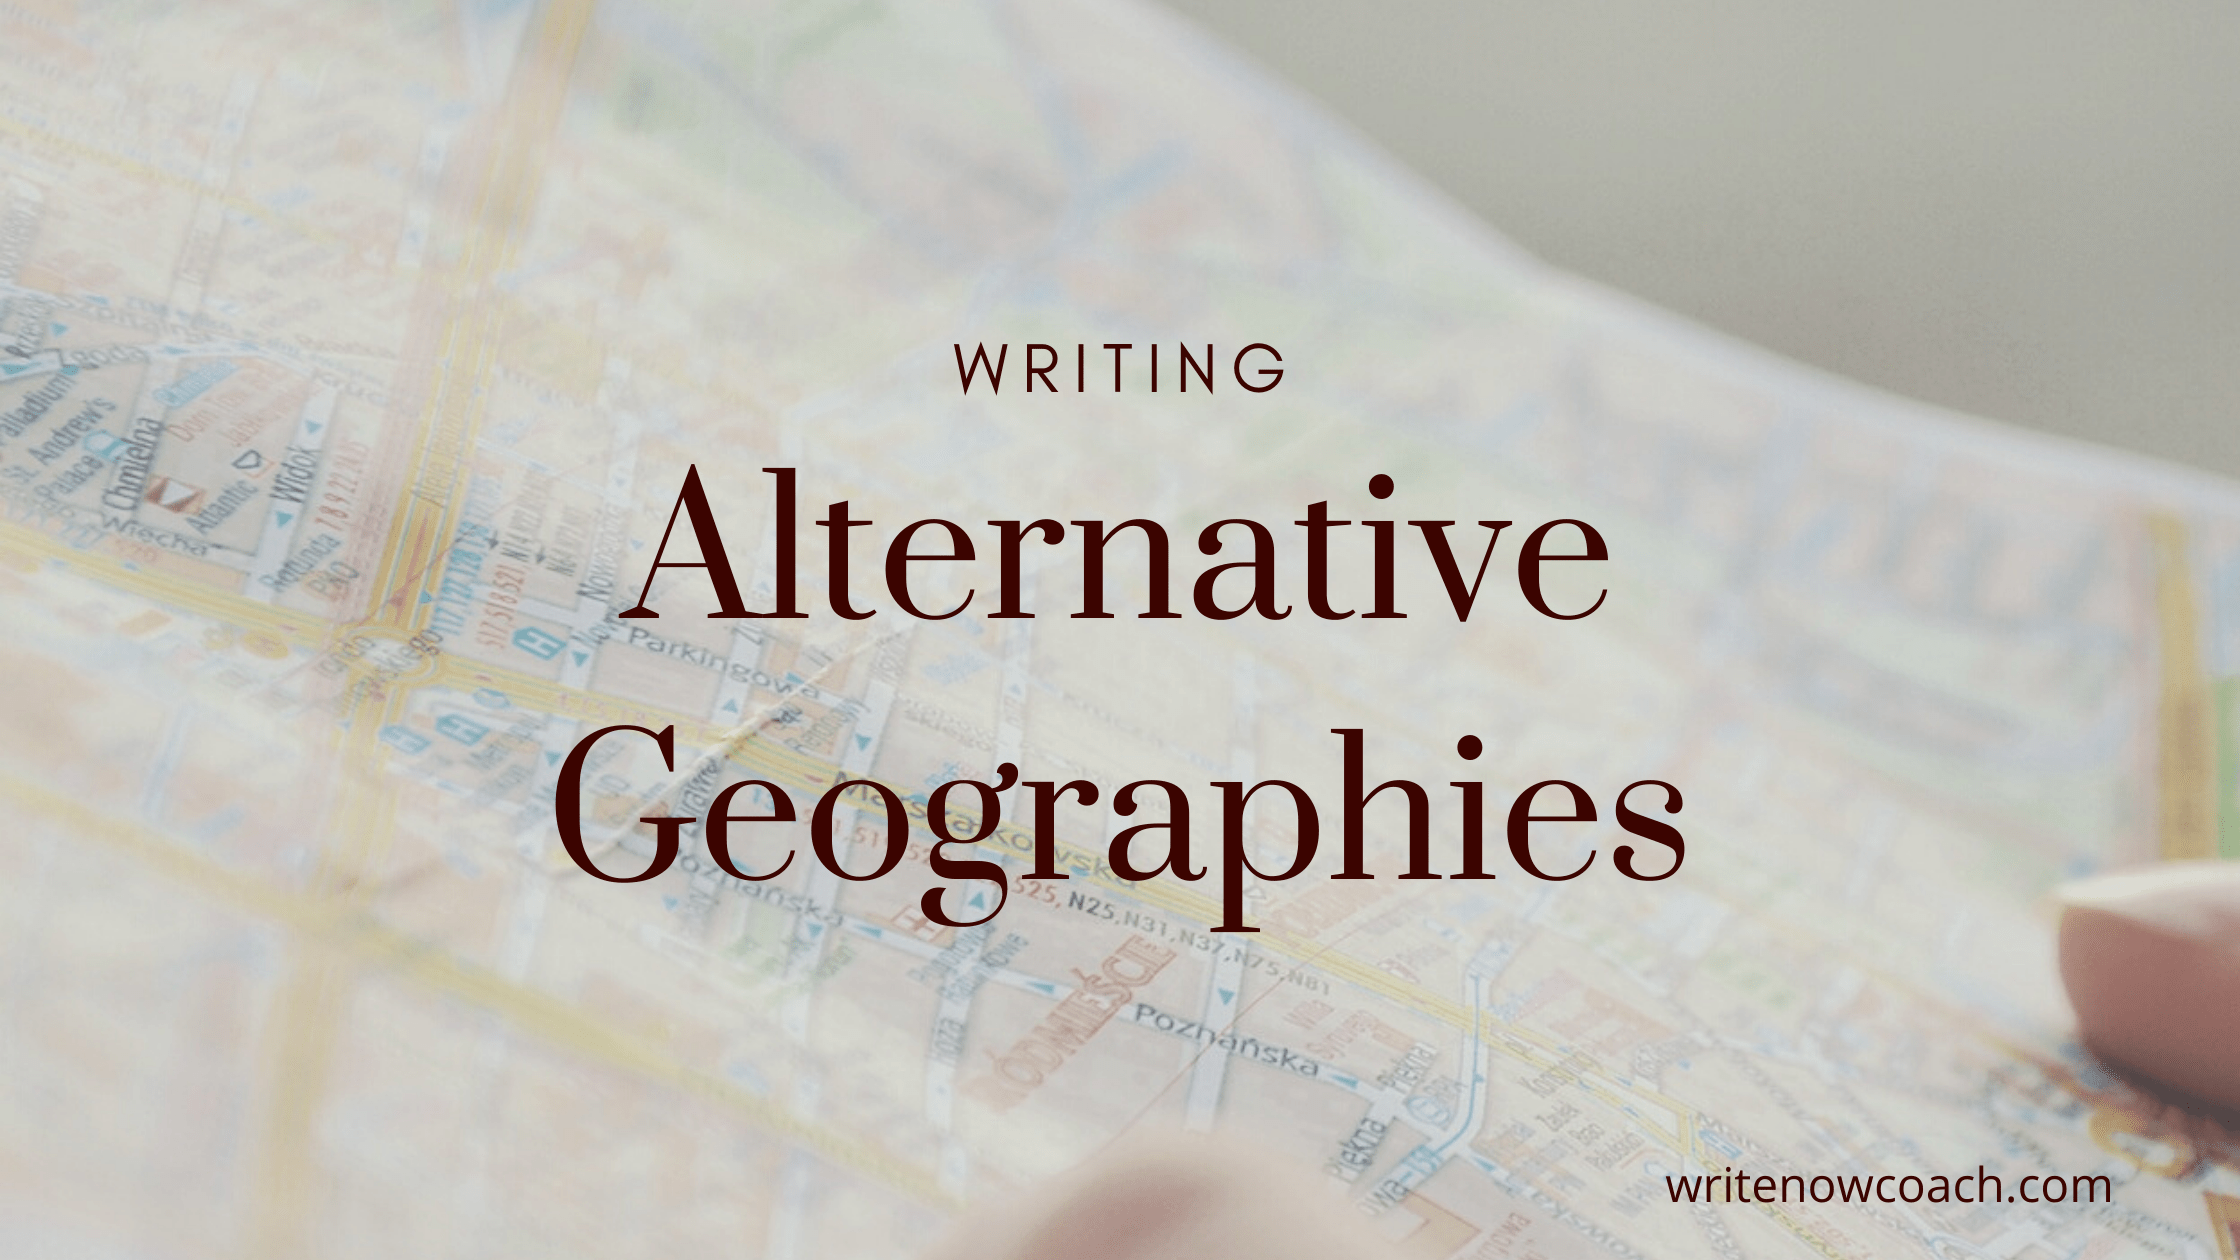 Geographies